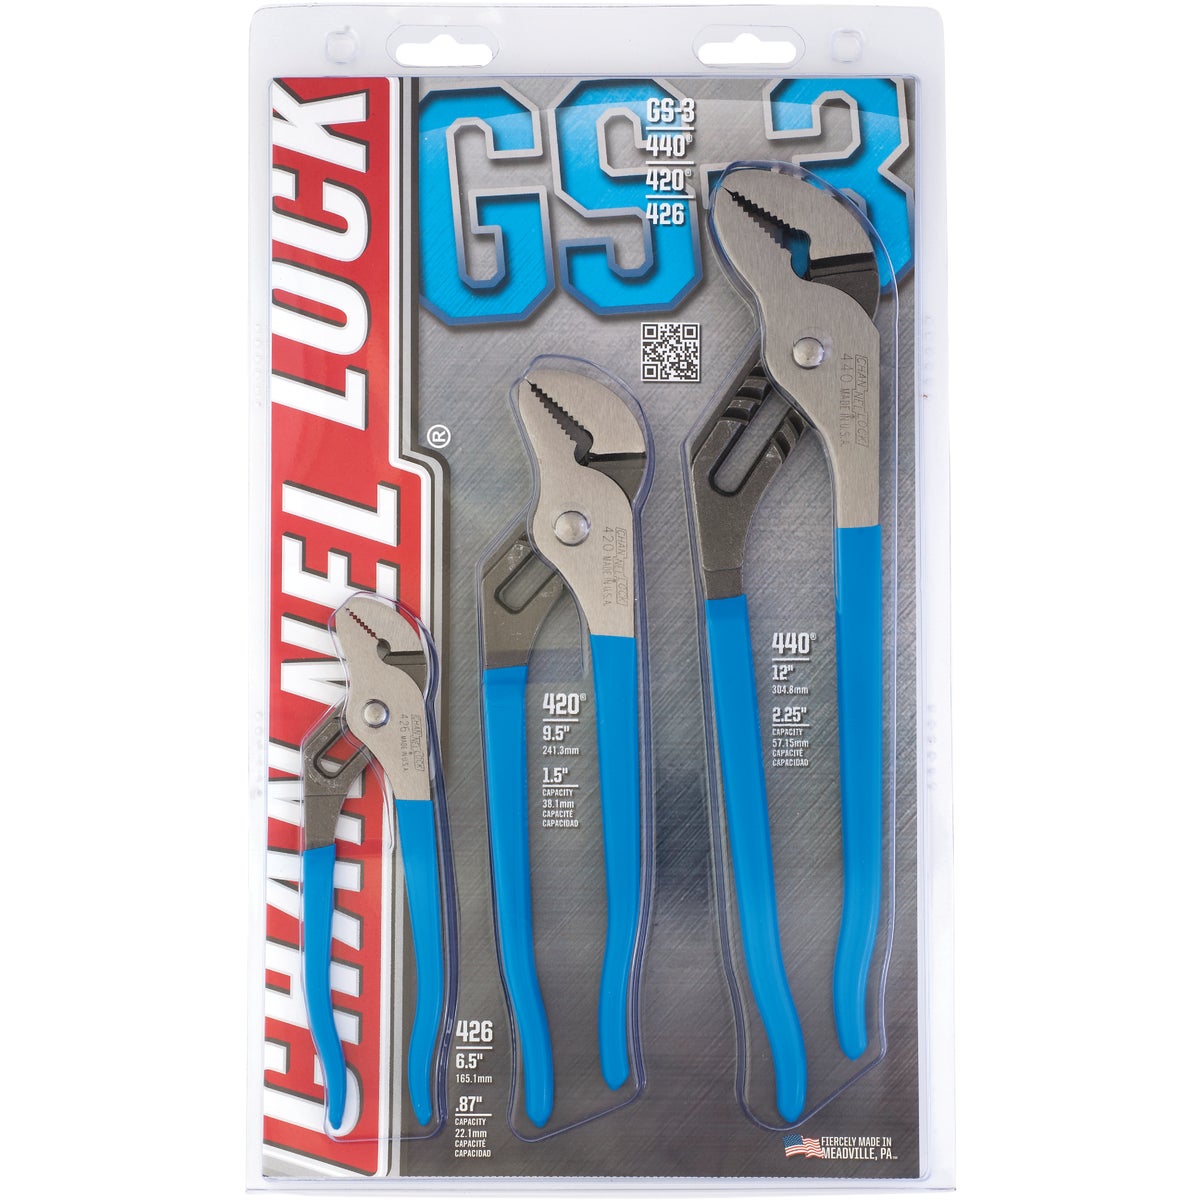 Channellock 6-1/2 In., 9-1/2 In. and 12 In. Tongue and Groove Plier Set (3-Piece)